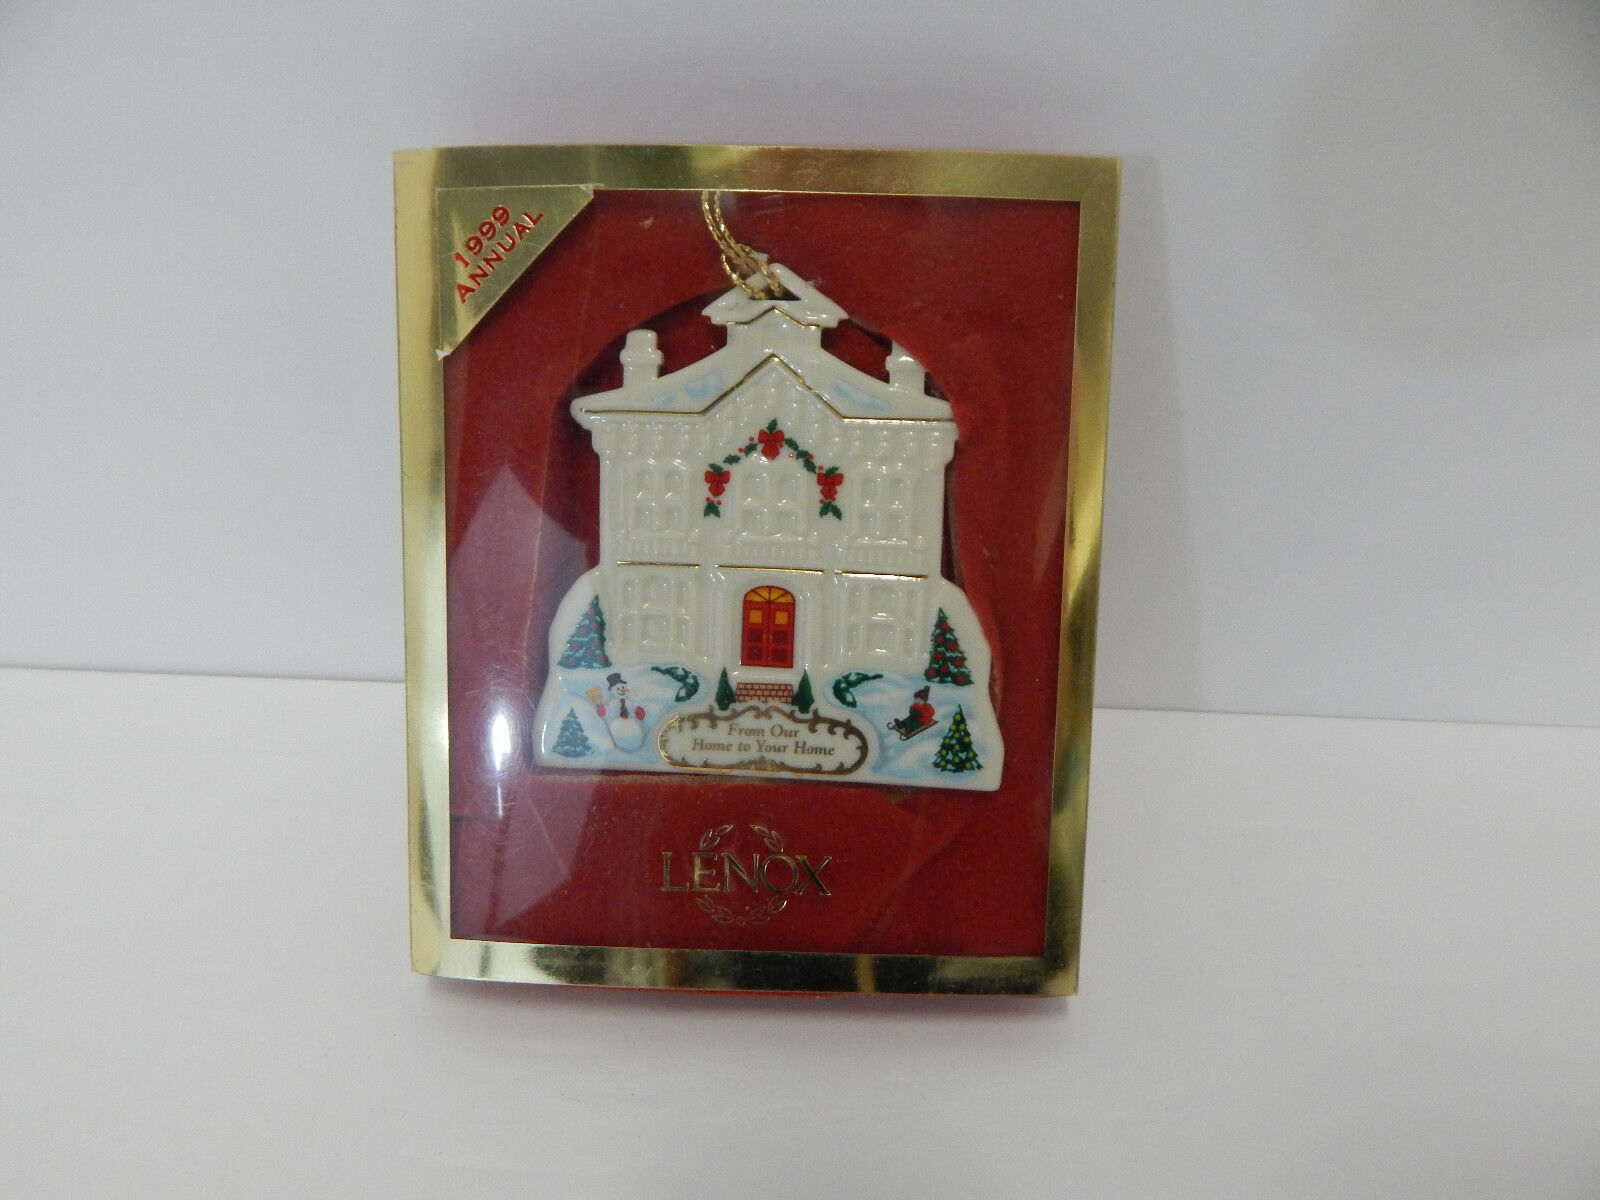 Primary image for Lenox FROM OUR HOME TO YOUR HOME House Ornament 1999